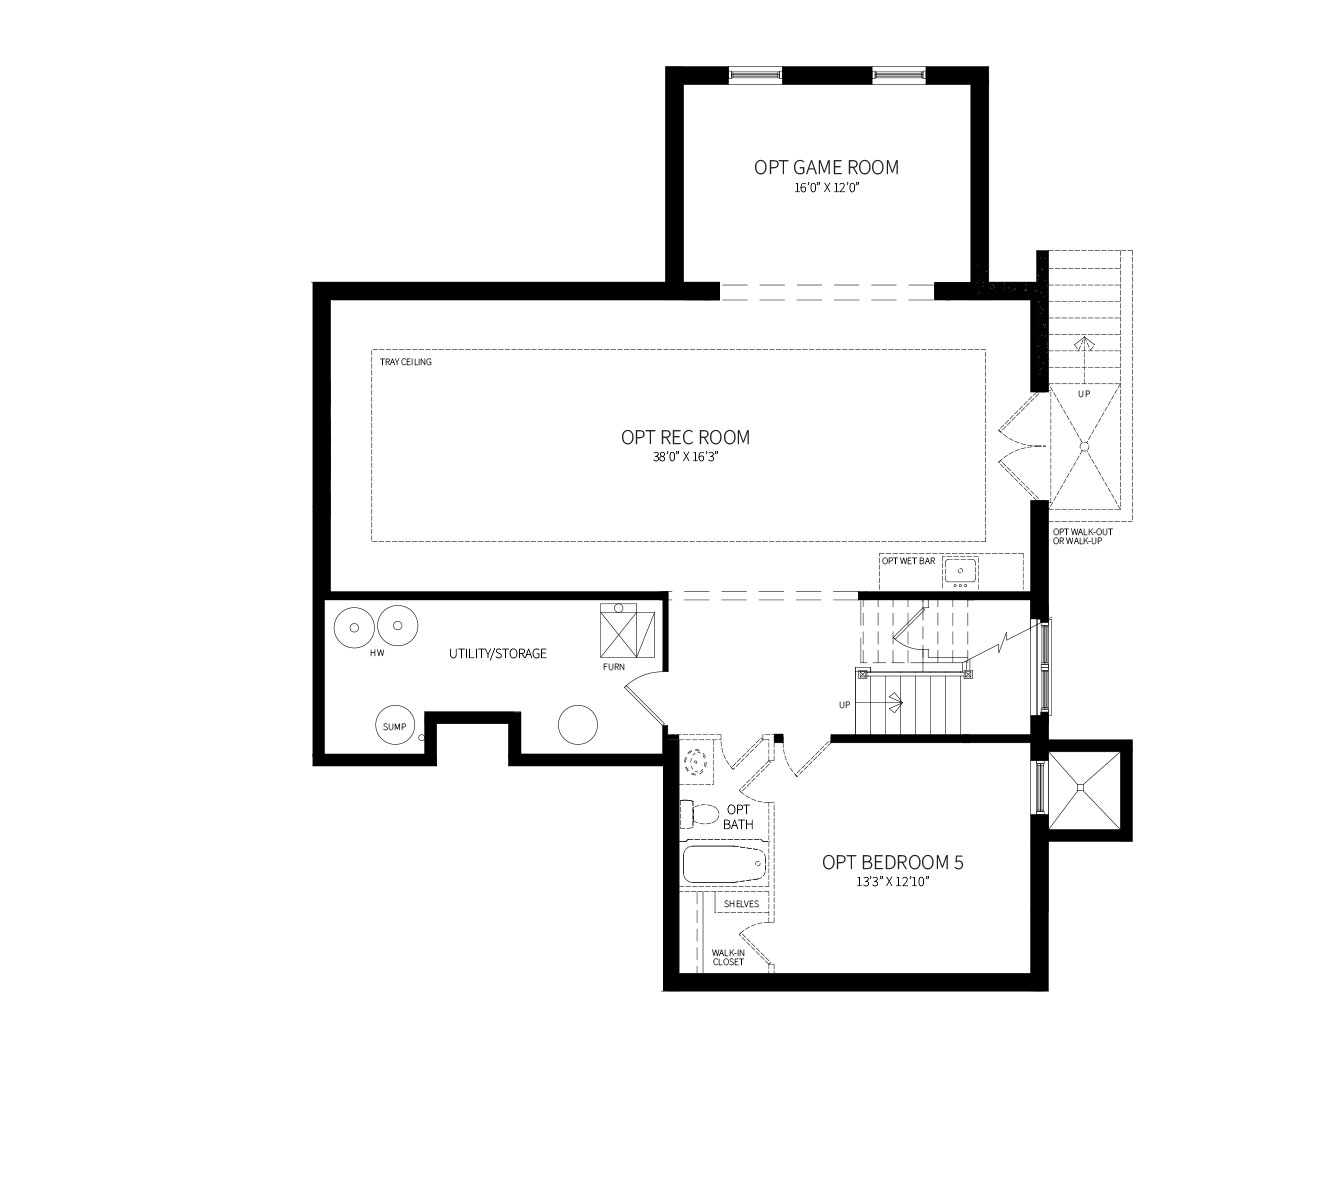 A proposed optional Basement plan for the Willow model featuring a Rec Room, Game Room and Bedroom with Bath.